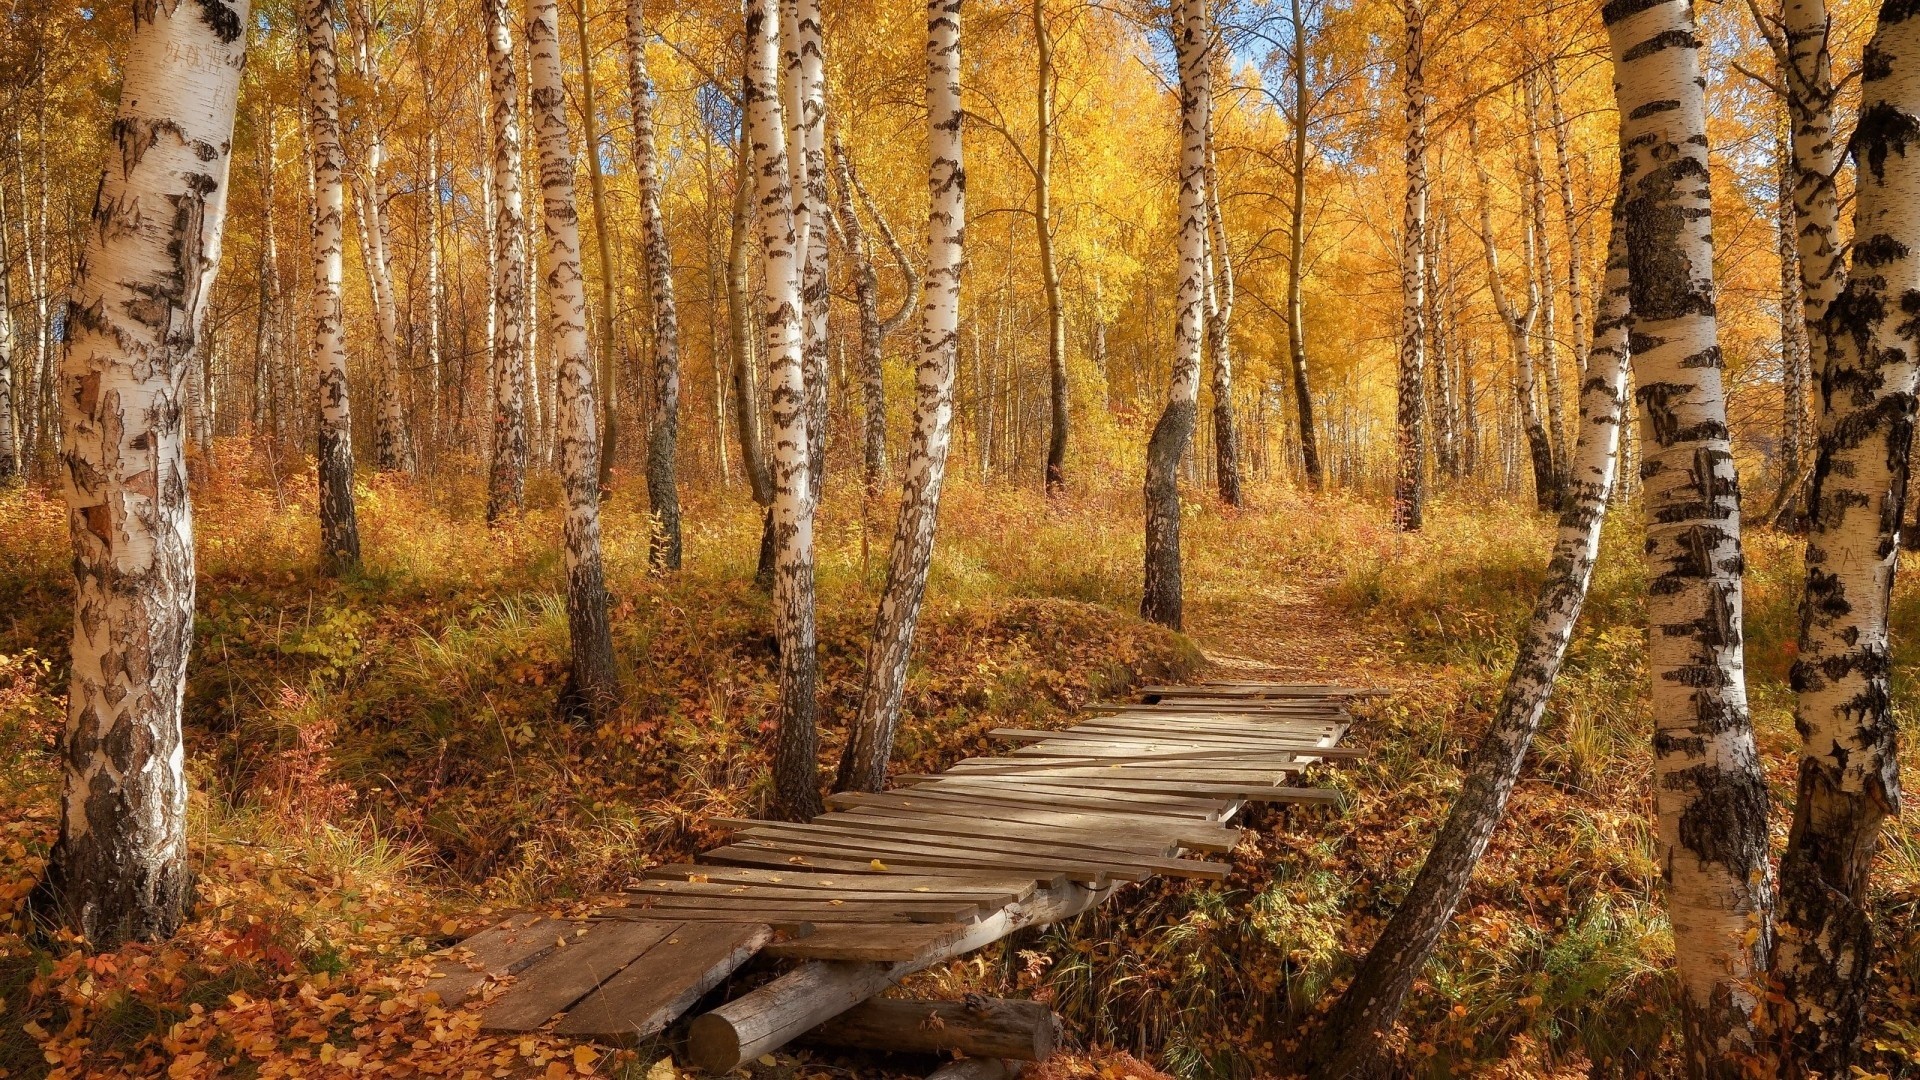 General 1920x1080 birch forest fall fallen leaves yellow path CGI nature outdoors plants leaves